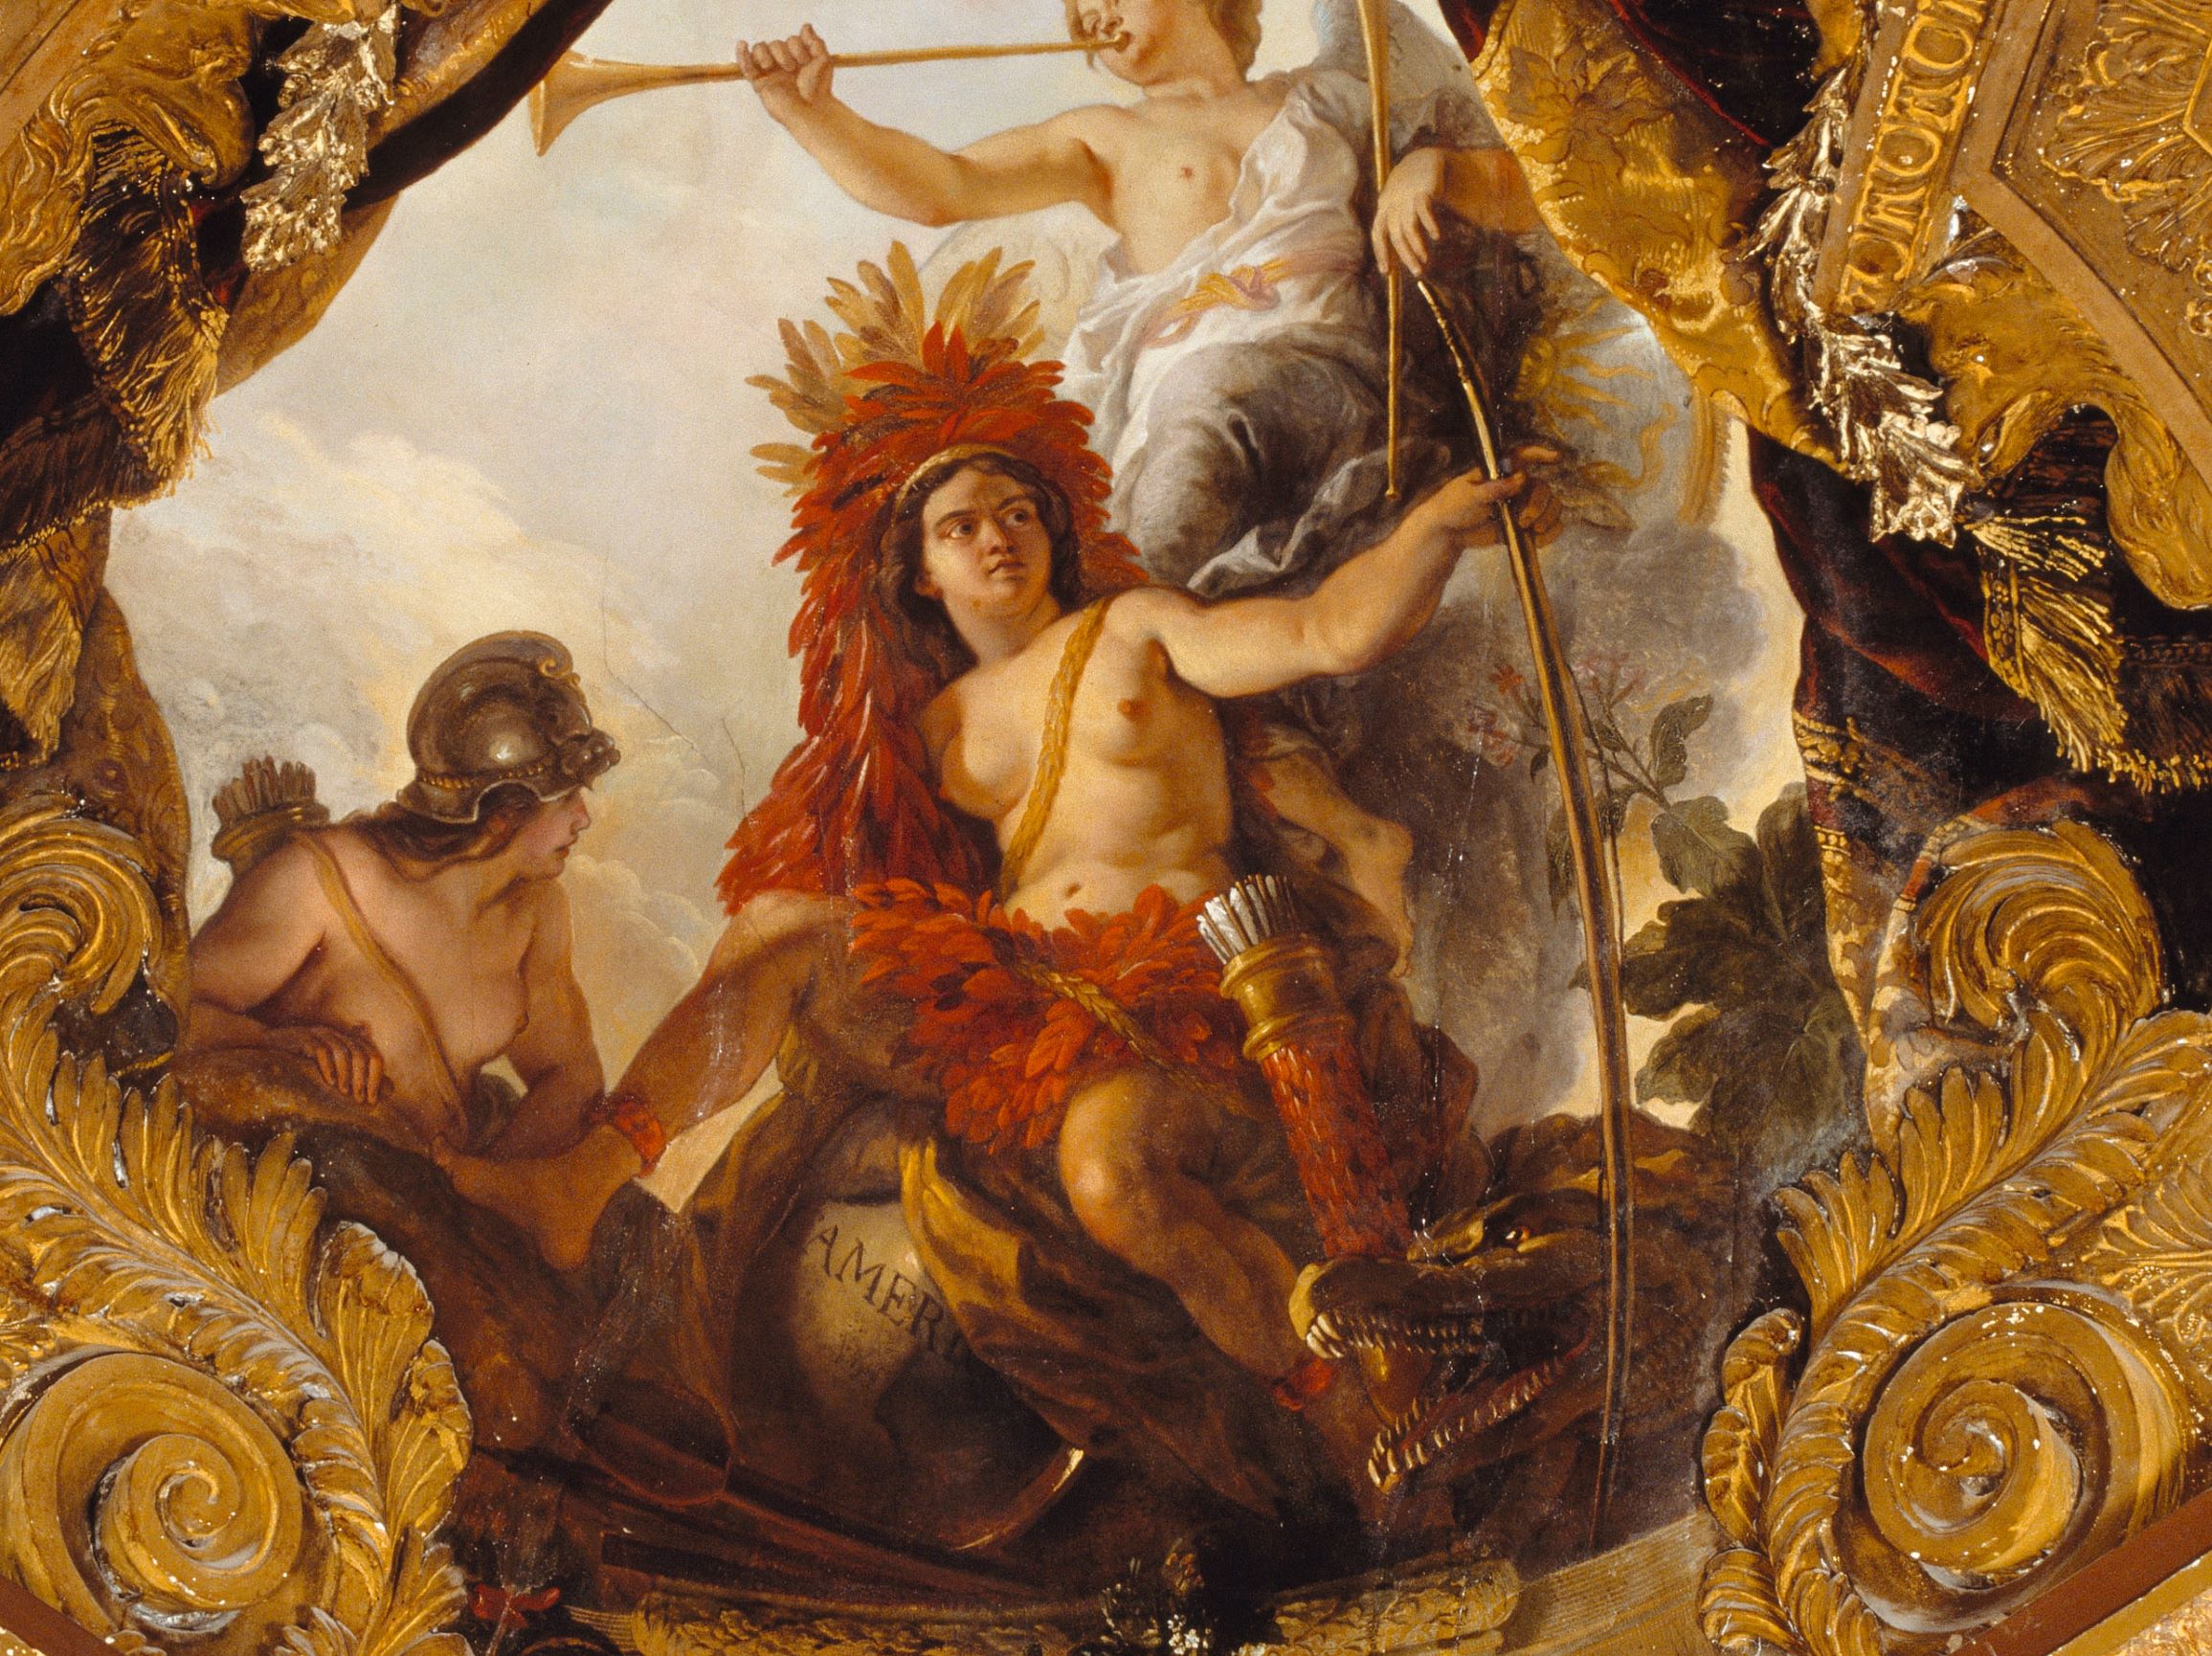 Charles de La Fosse, America, c.1672. Detail from the ceiling of the Salon of Apollo, Versailles. From Exotic